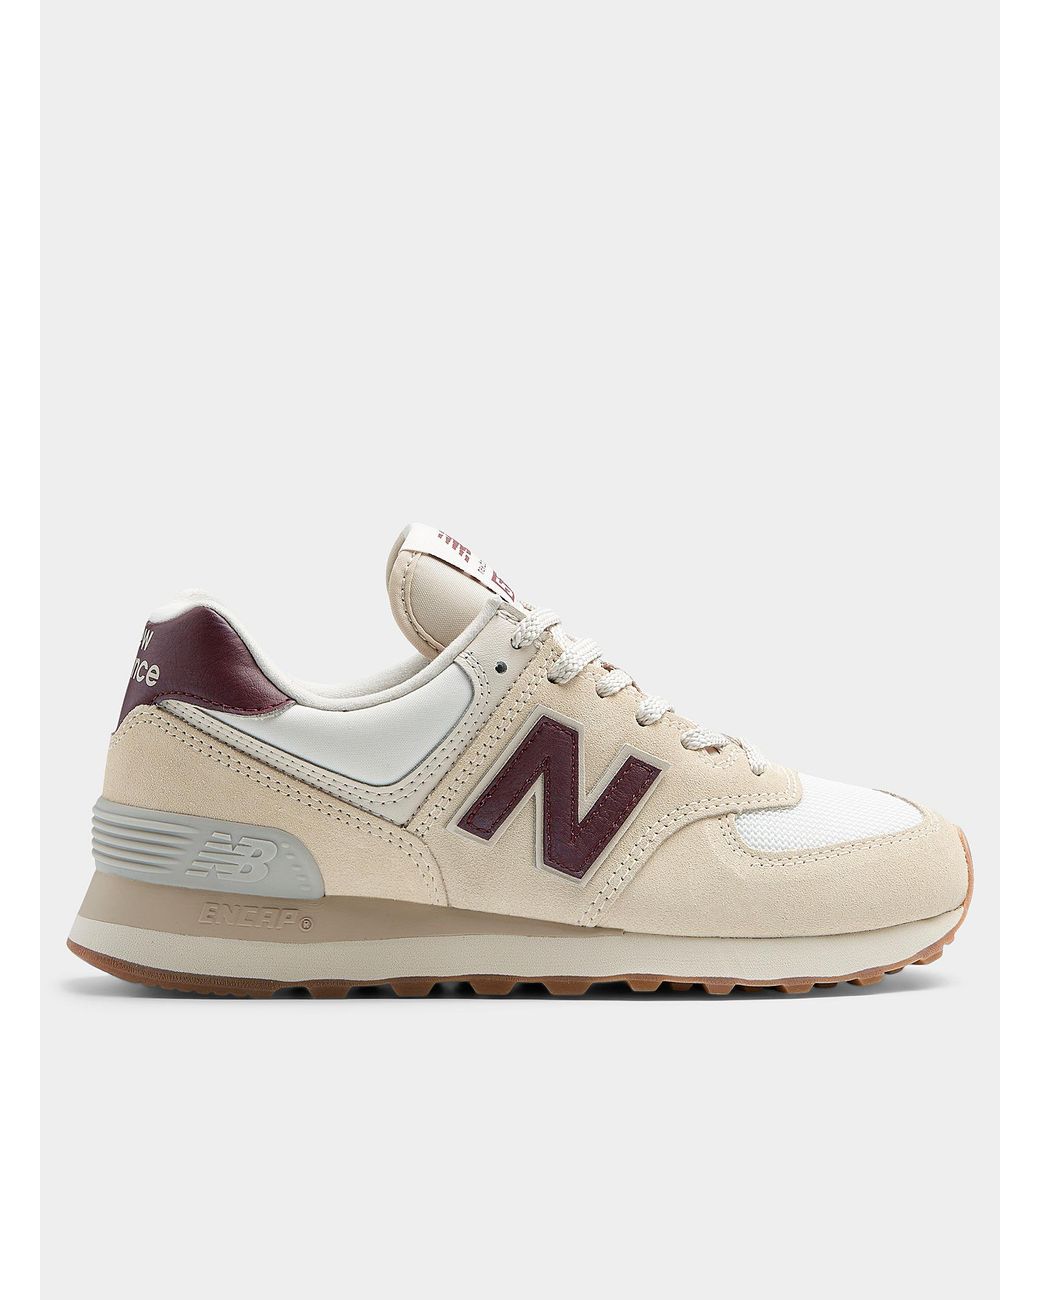 New Balance Core 574 Sneakers Women in Natural | Lyst